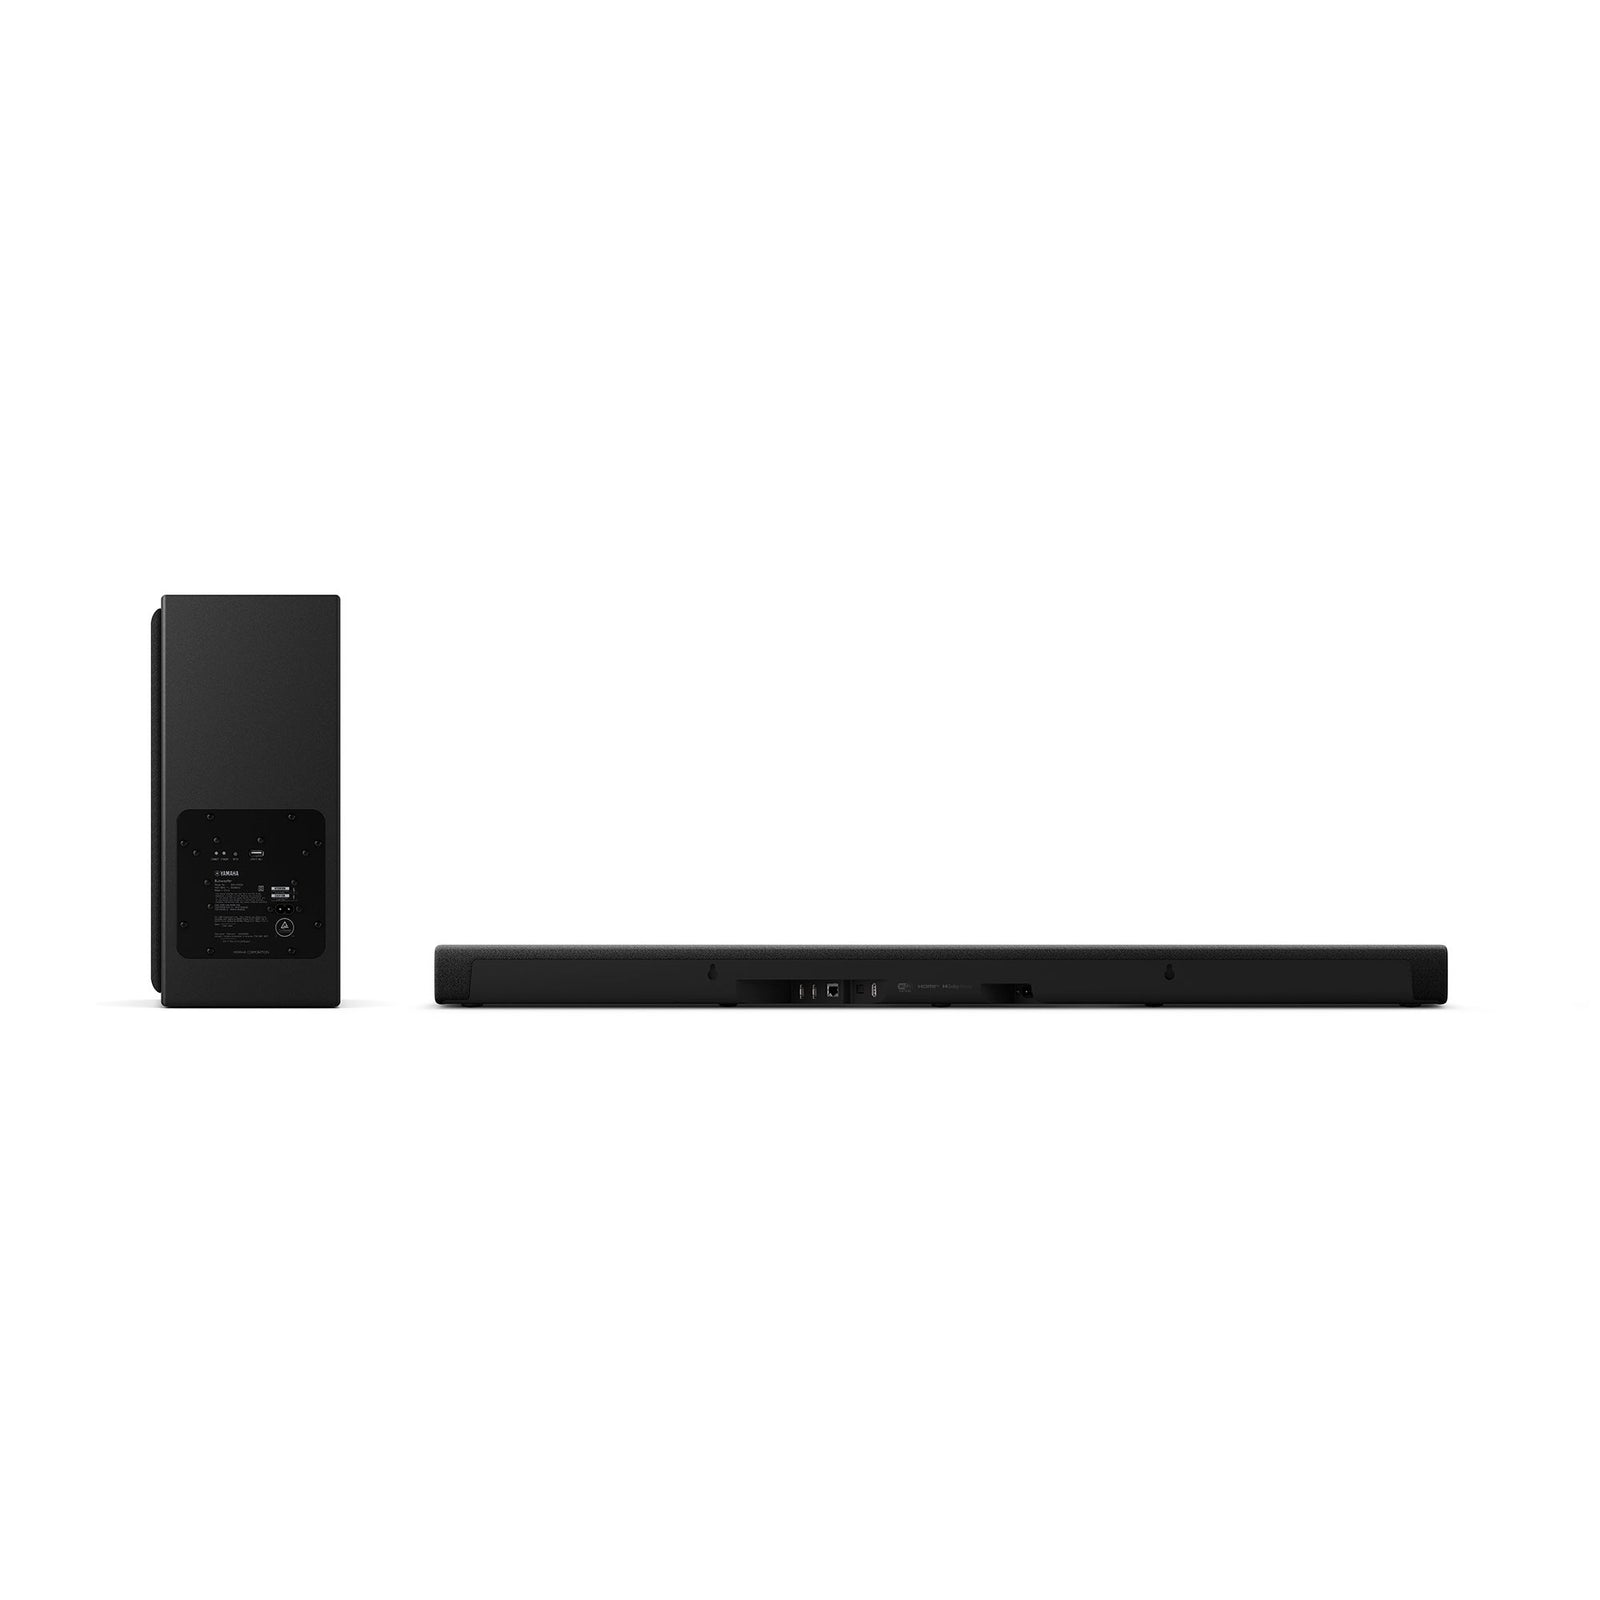 YAMAHA SRX50A TURE X SOUND BAR WITH EXTERNAL SUBWOOFER | VINYL SOUND True X Soundbar with external subwoofer True X Surround (Separately sold True X speakers are required to play contents with True X surround.) Dolby Atmos® Alexa Built-in Spotify Connect, AirPlay 2, and Tidal Connect HDMI eARC(out), HDMI in, Bluetooth®